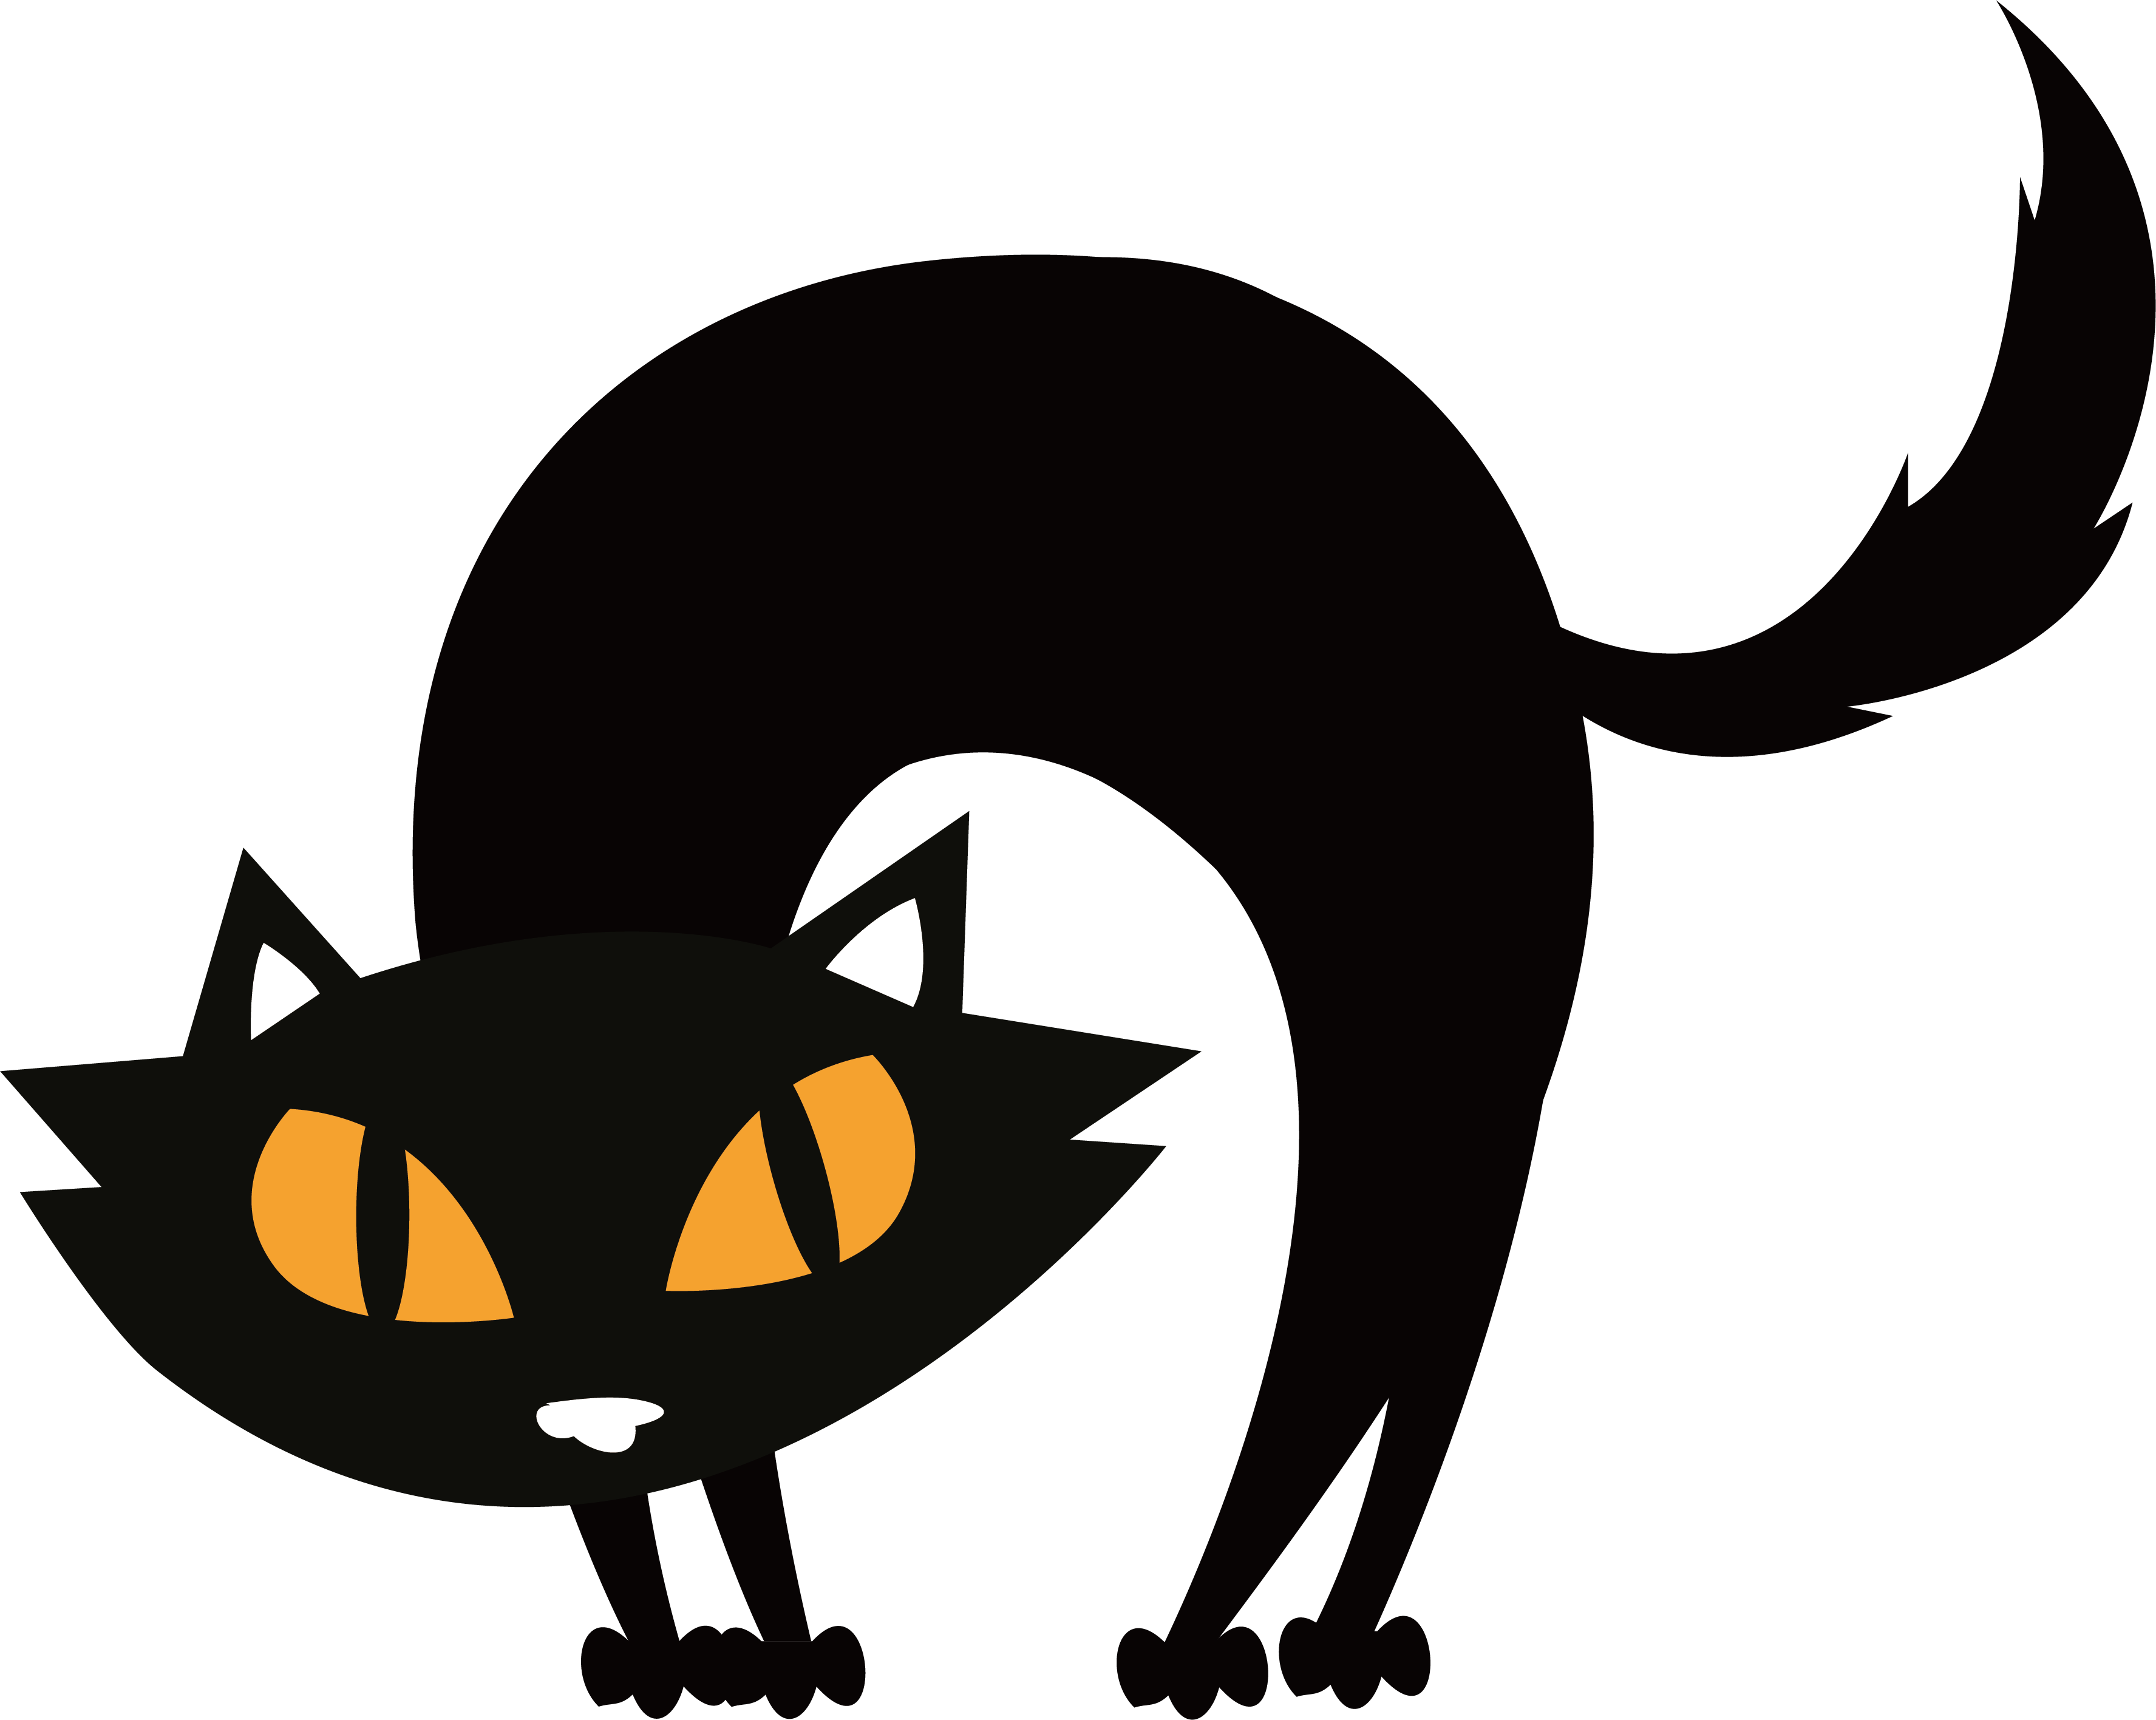 Black cat Halloween Scalable Vector Graphics - Fried black cat png